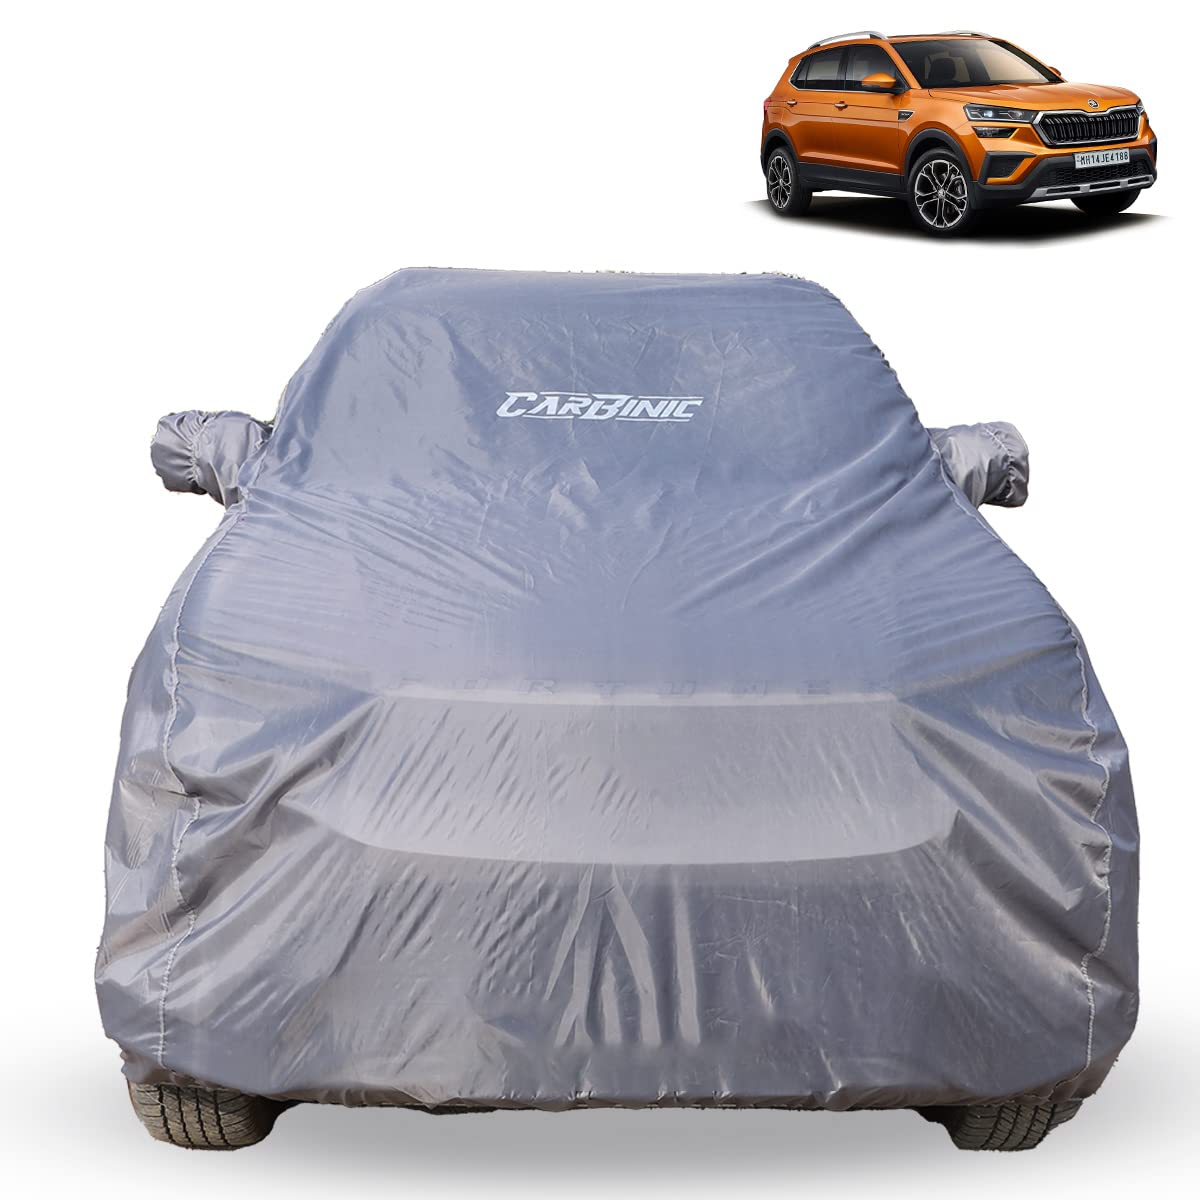 CARBINIC Car Body Cover for Skoda Kushaq 2021 | Water Resistant, UV Protection Car Cover | Scratchproof Body Shield | Dustproof All-Weather Cover | Mirror Pocket & Antenna | Car Accessories, Grey